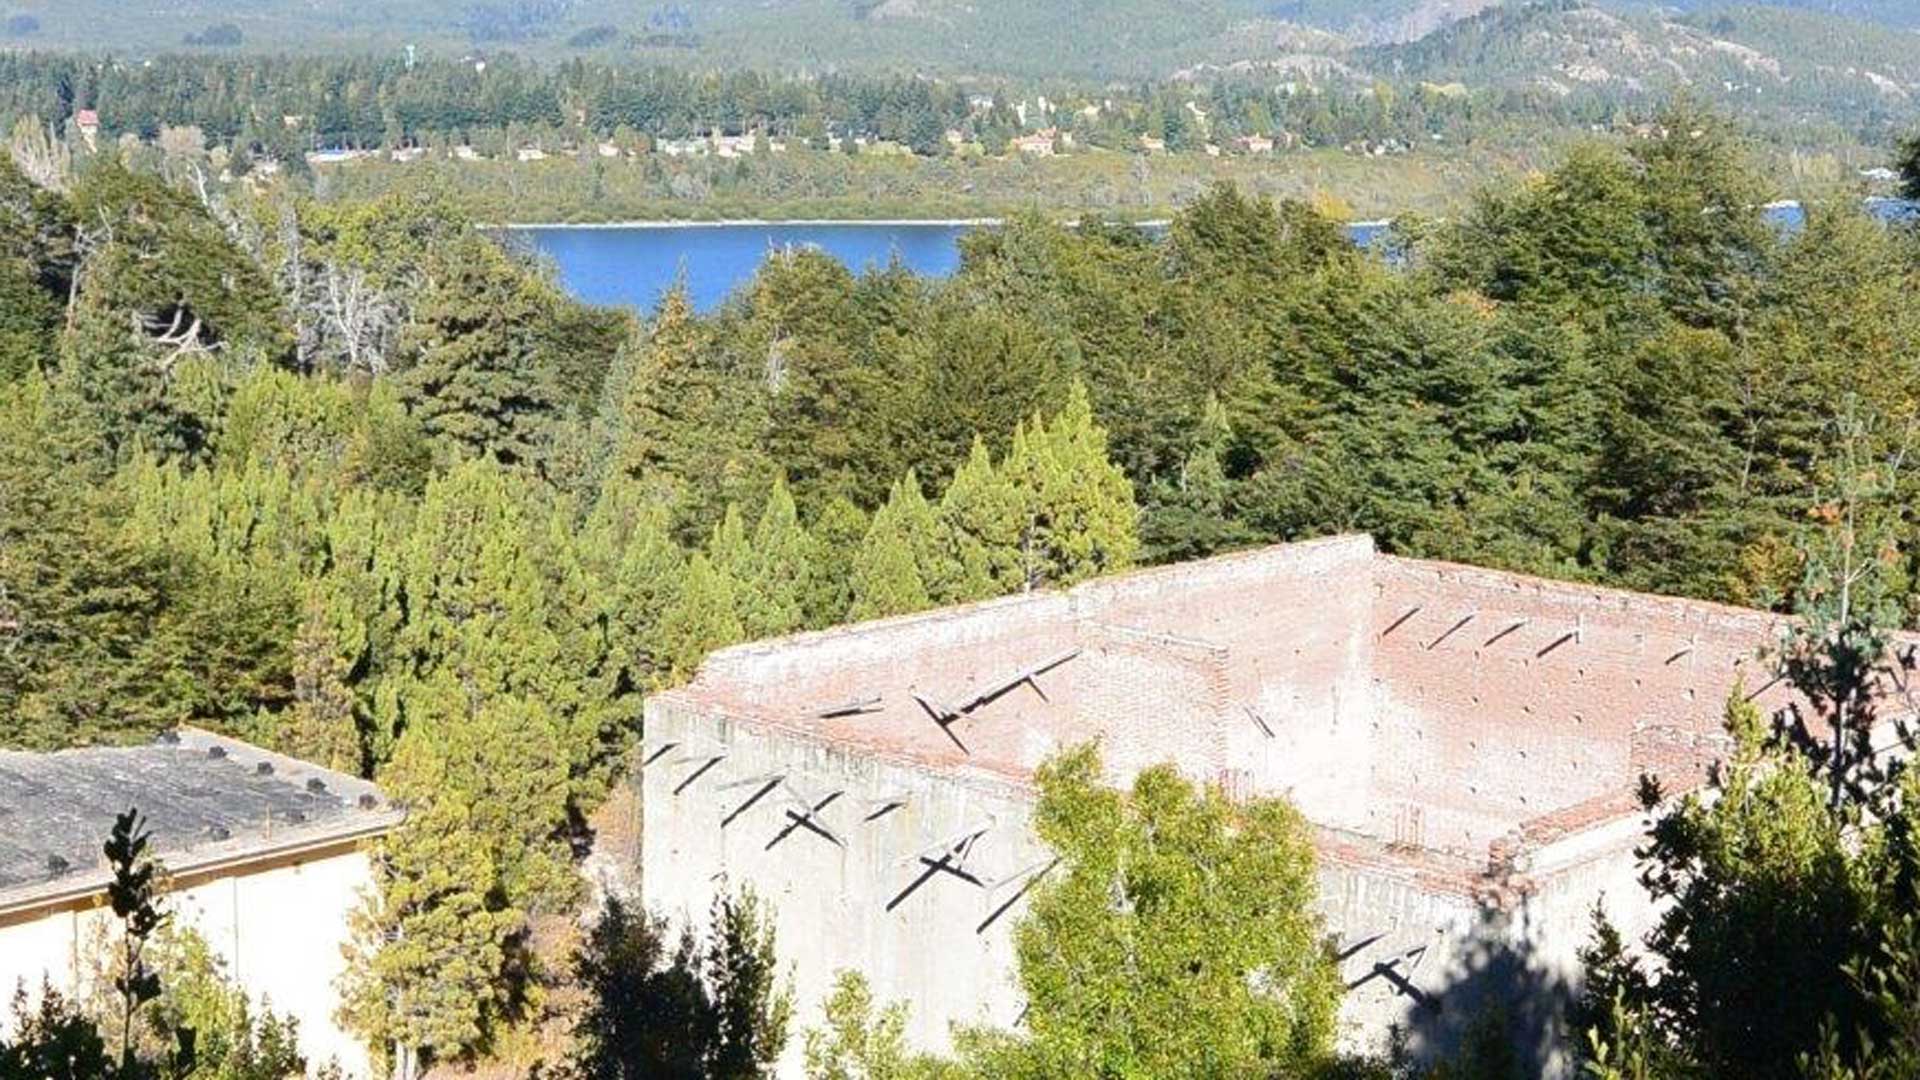 old brick structure surrounded by trees, with a lake and mountains in the background